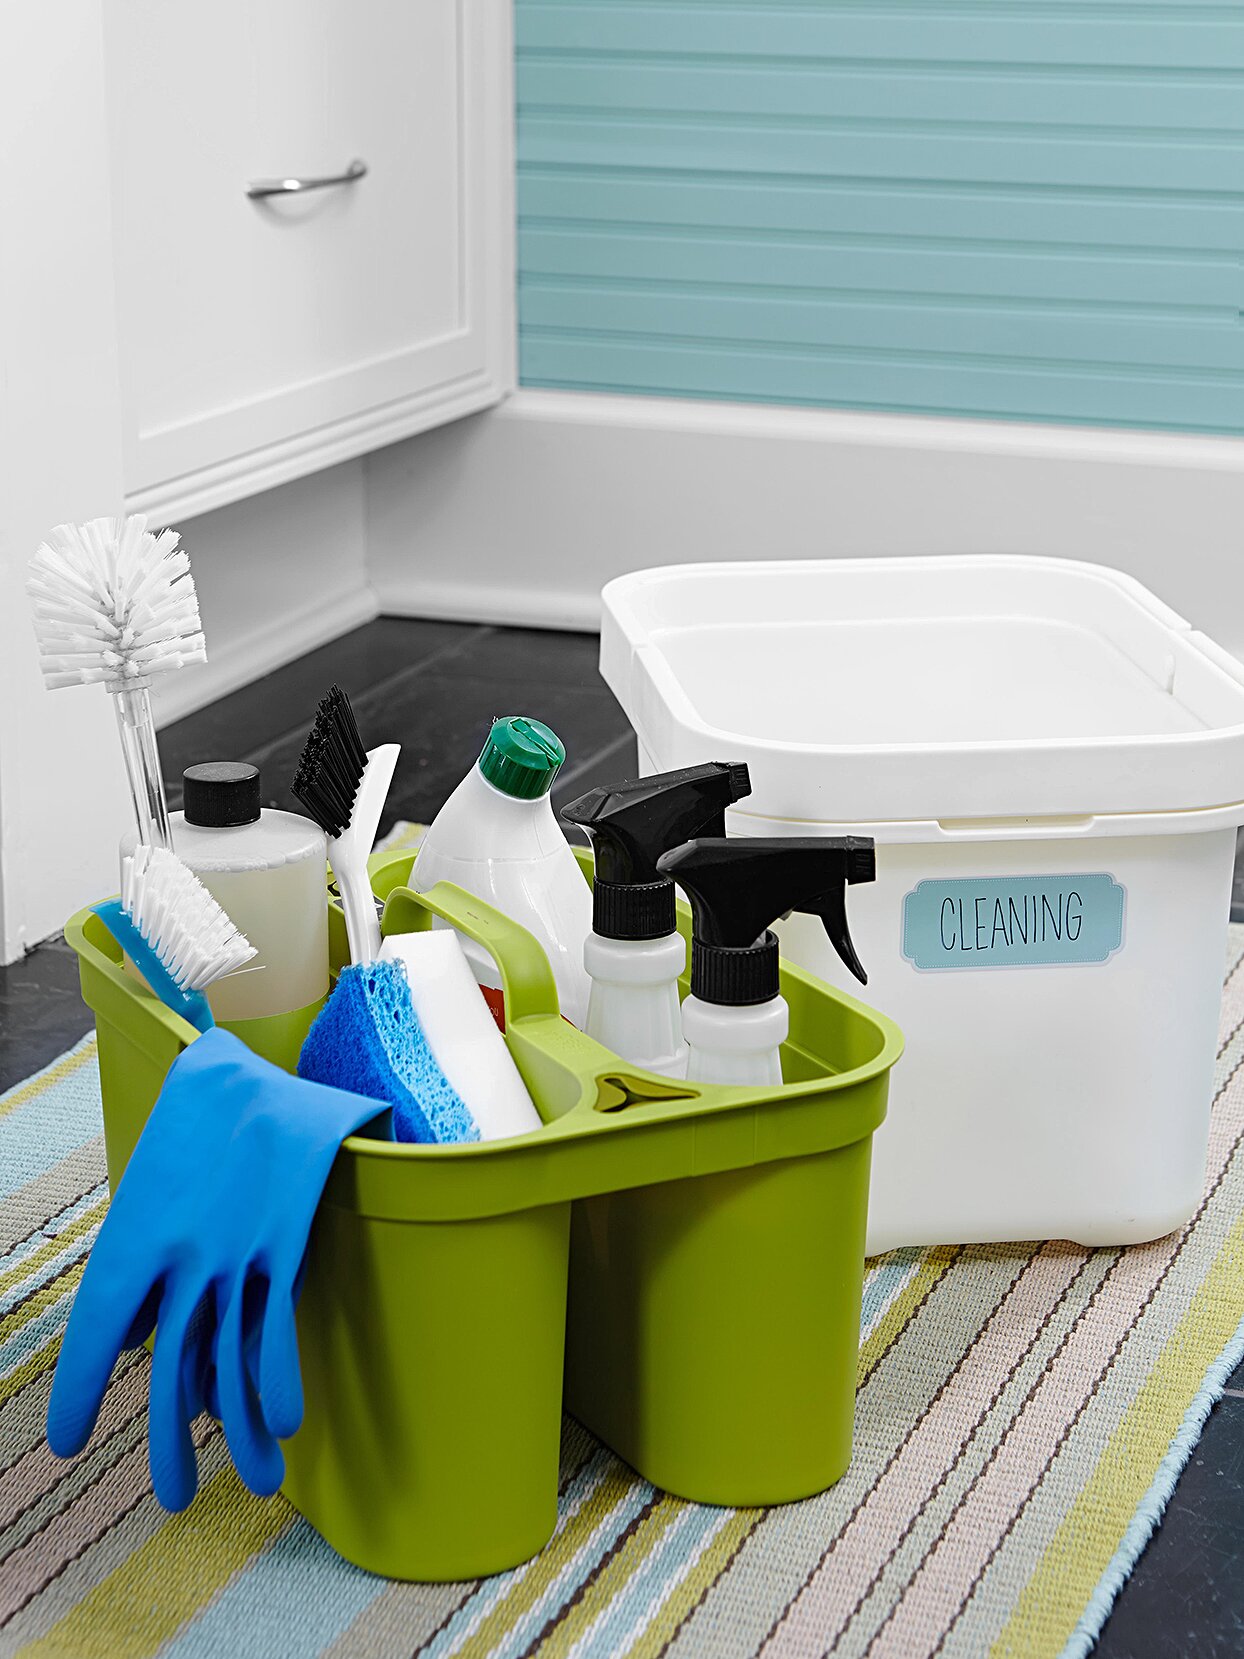 Home Cleaning Equipment